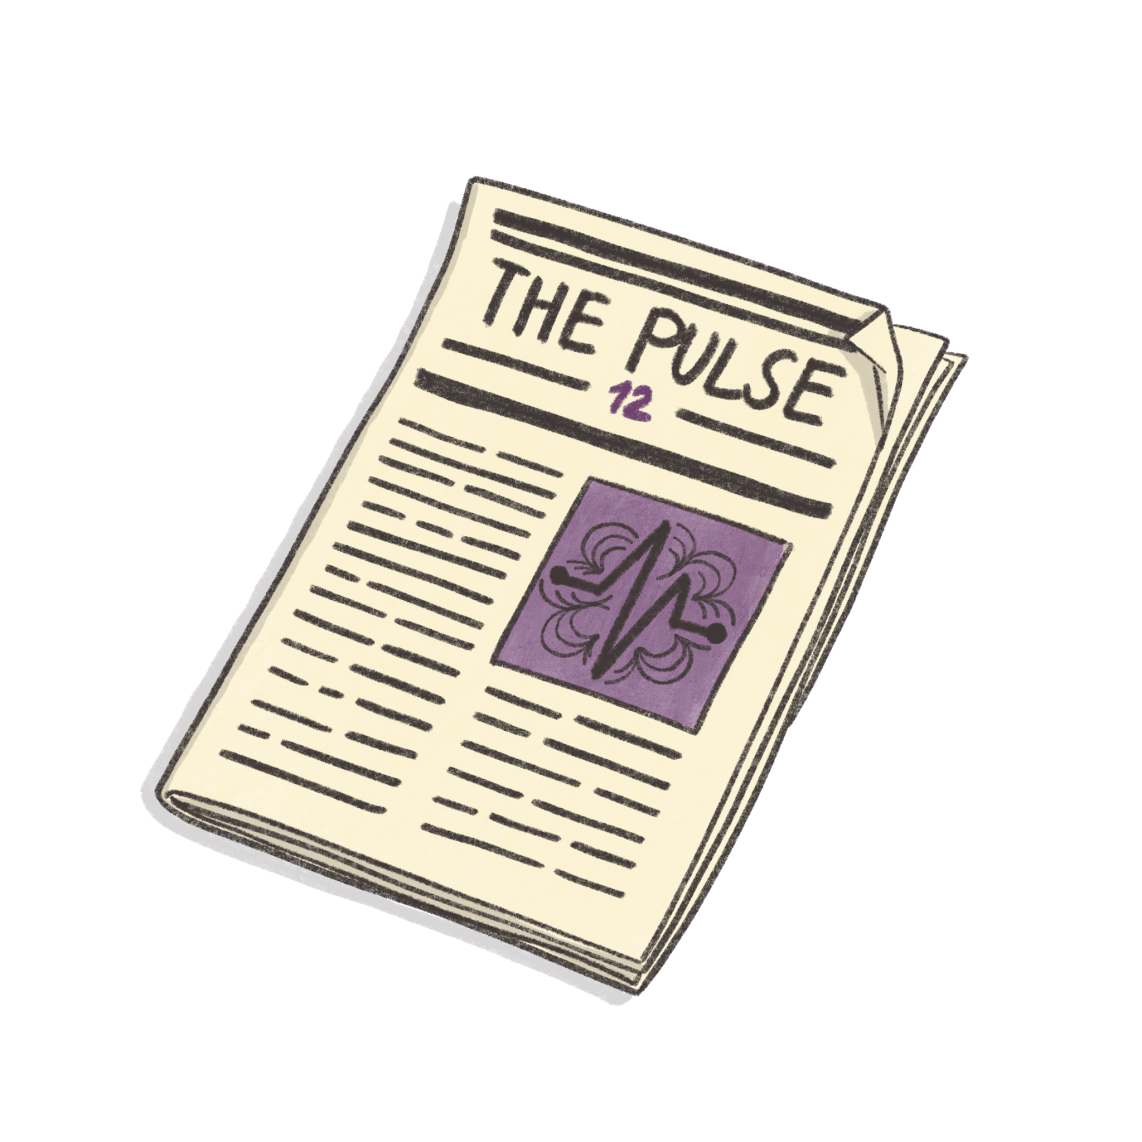 The Apoio Pulse – Issue 12 image